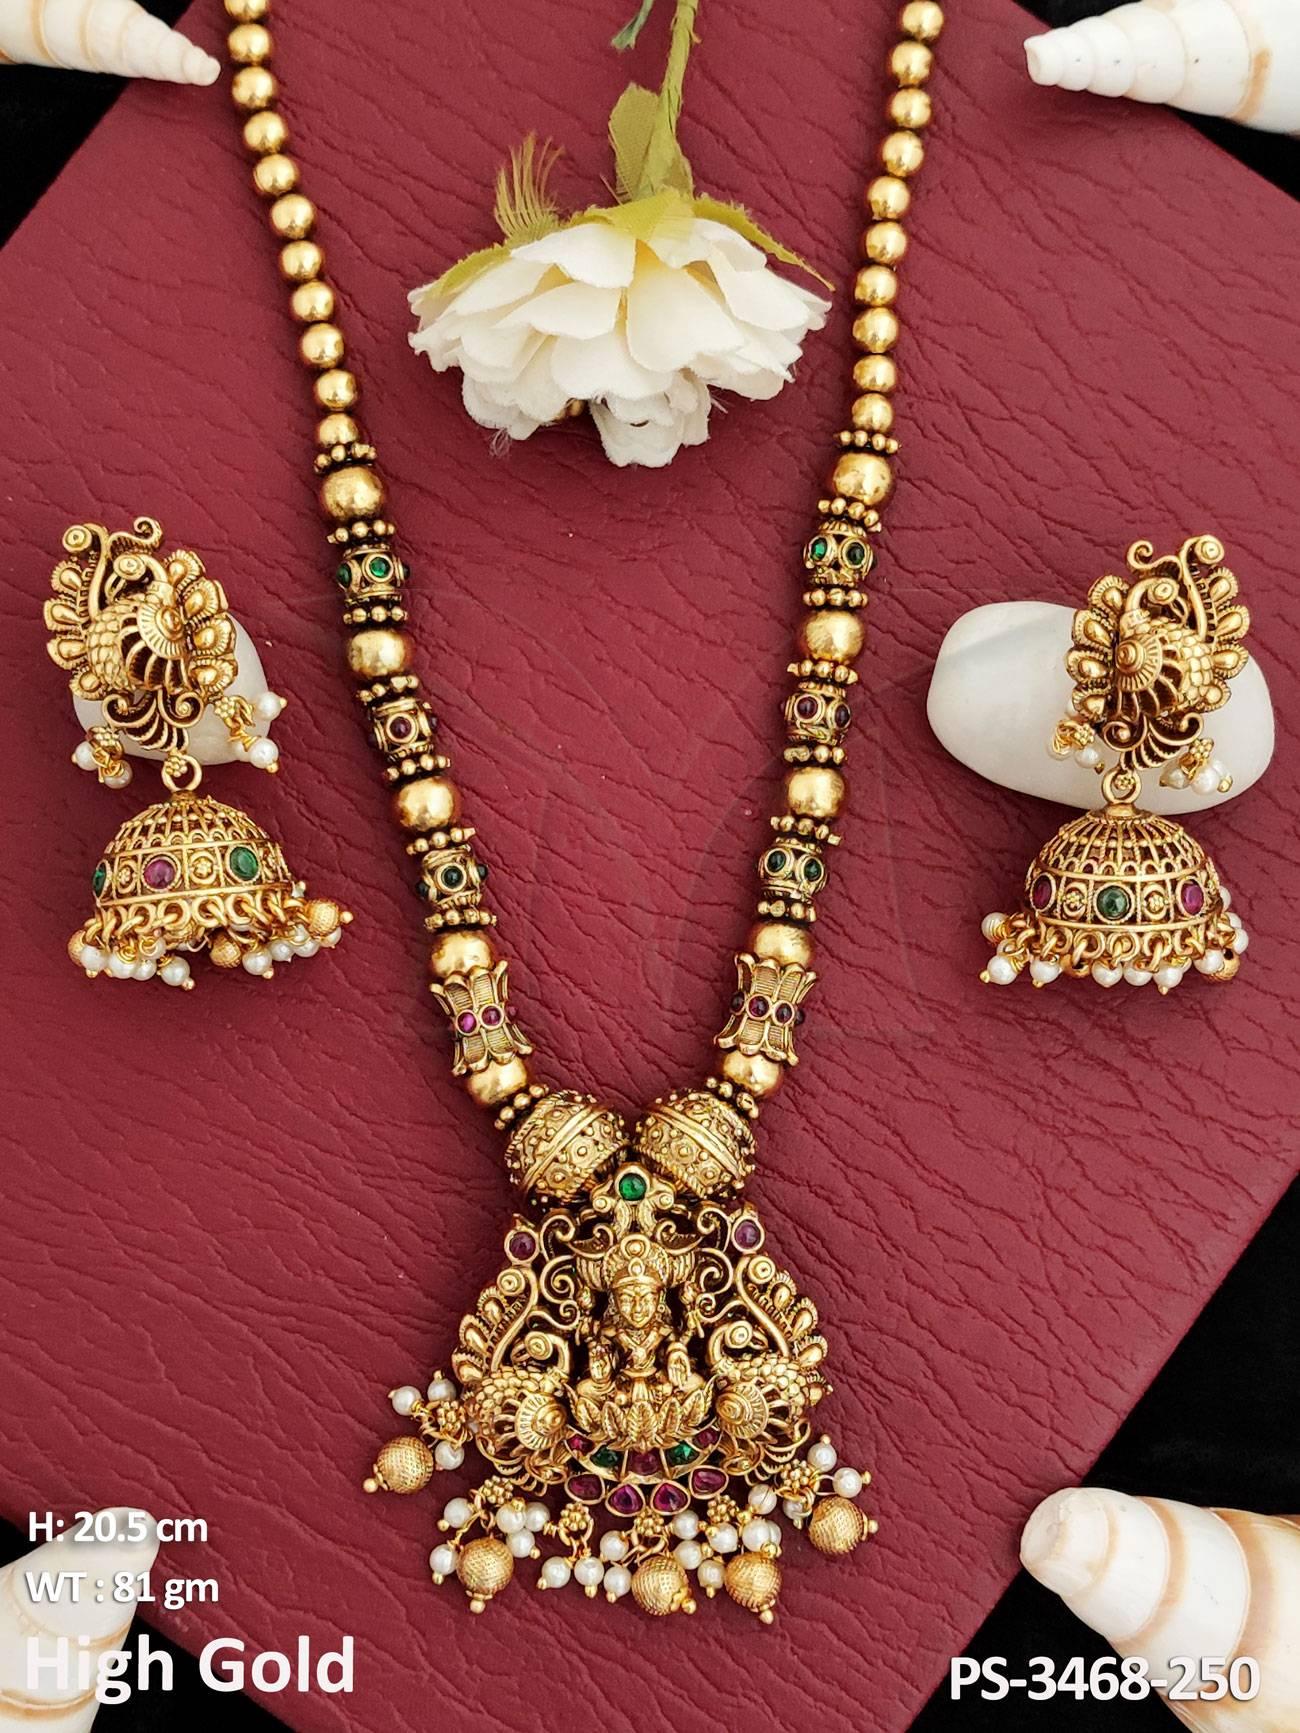 Perfect for traditional celebrations, this timeless set offers a sophisticated look that is sure to impress.